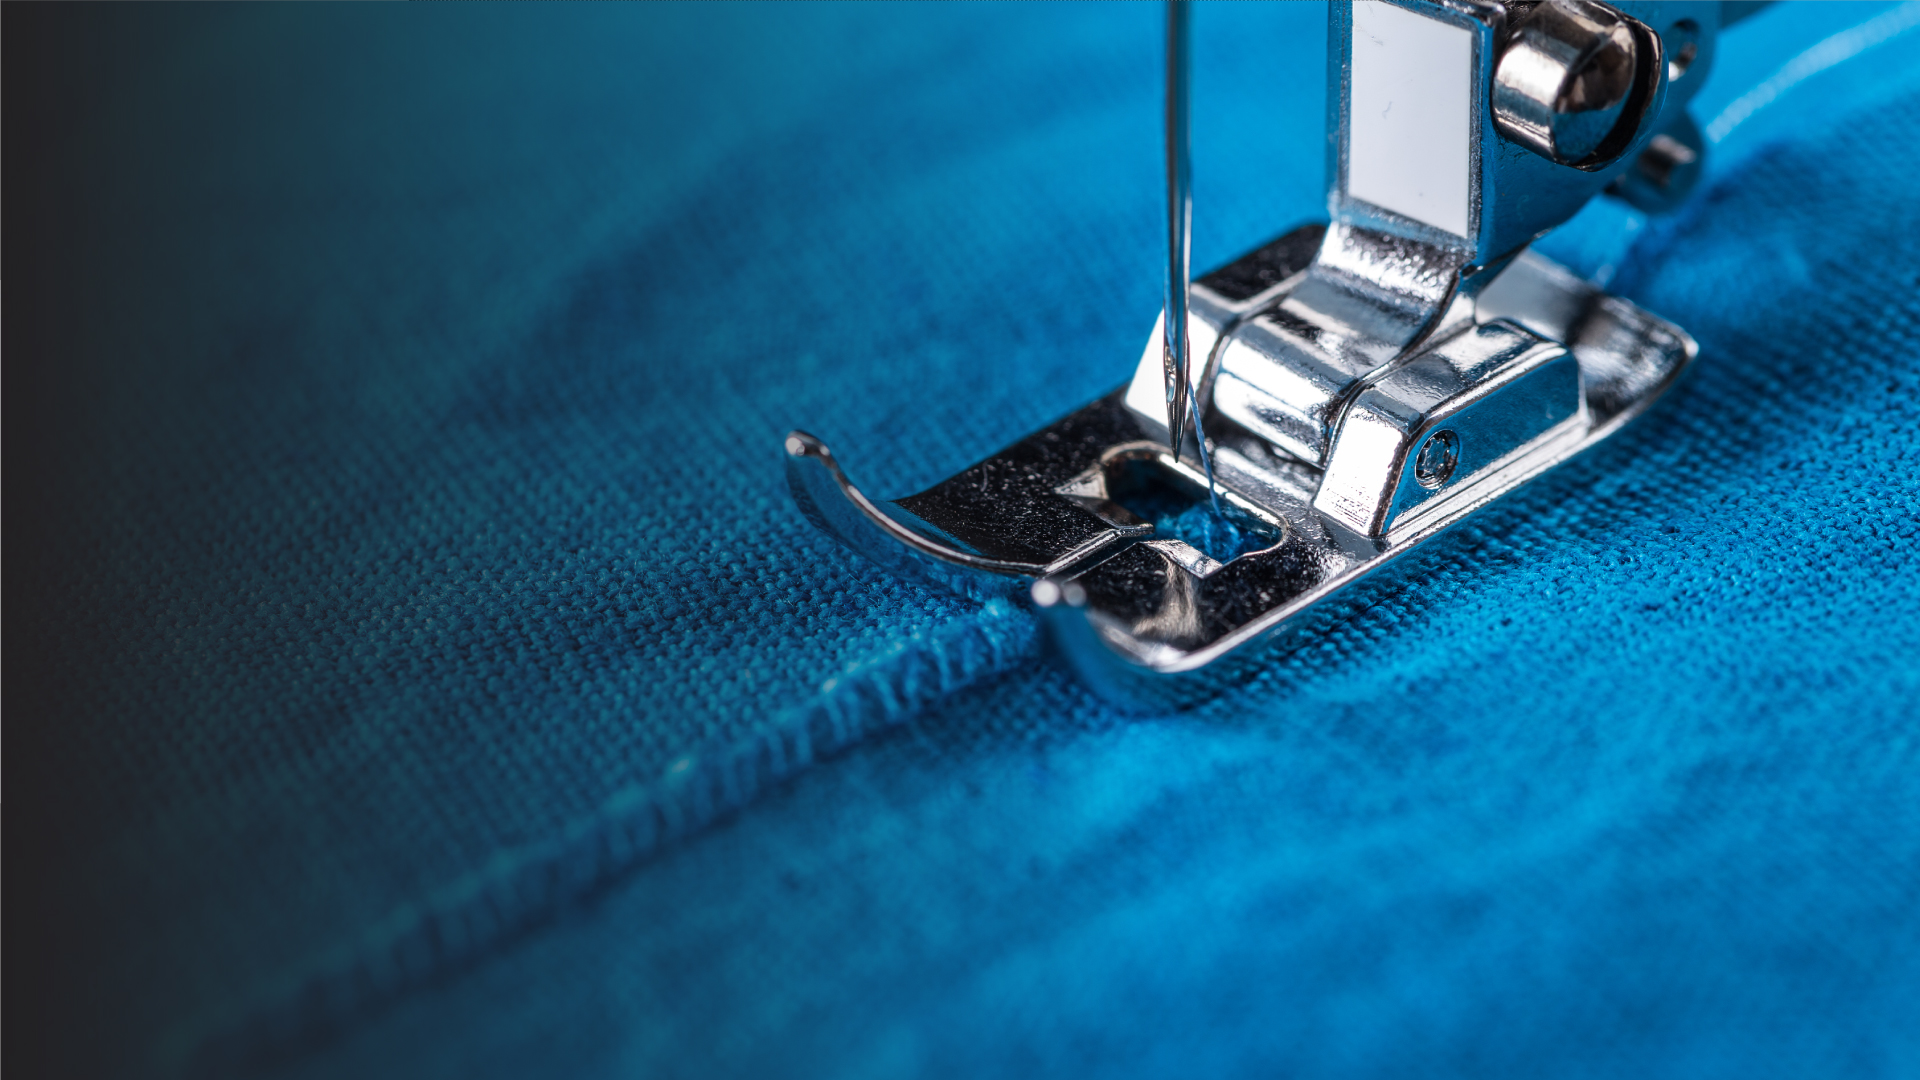 Beginners' Sewing Series Part 3  Determining Your Garment Sewing